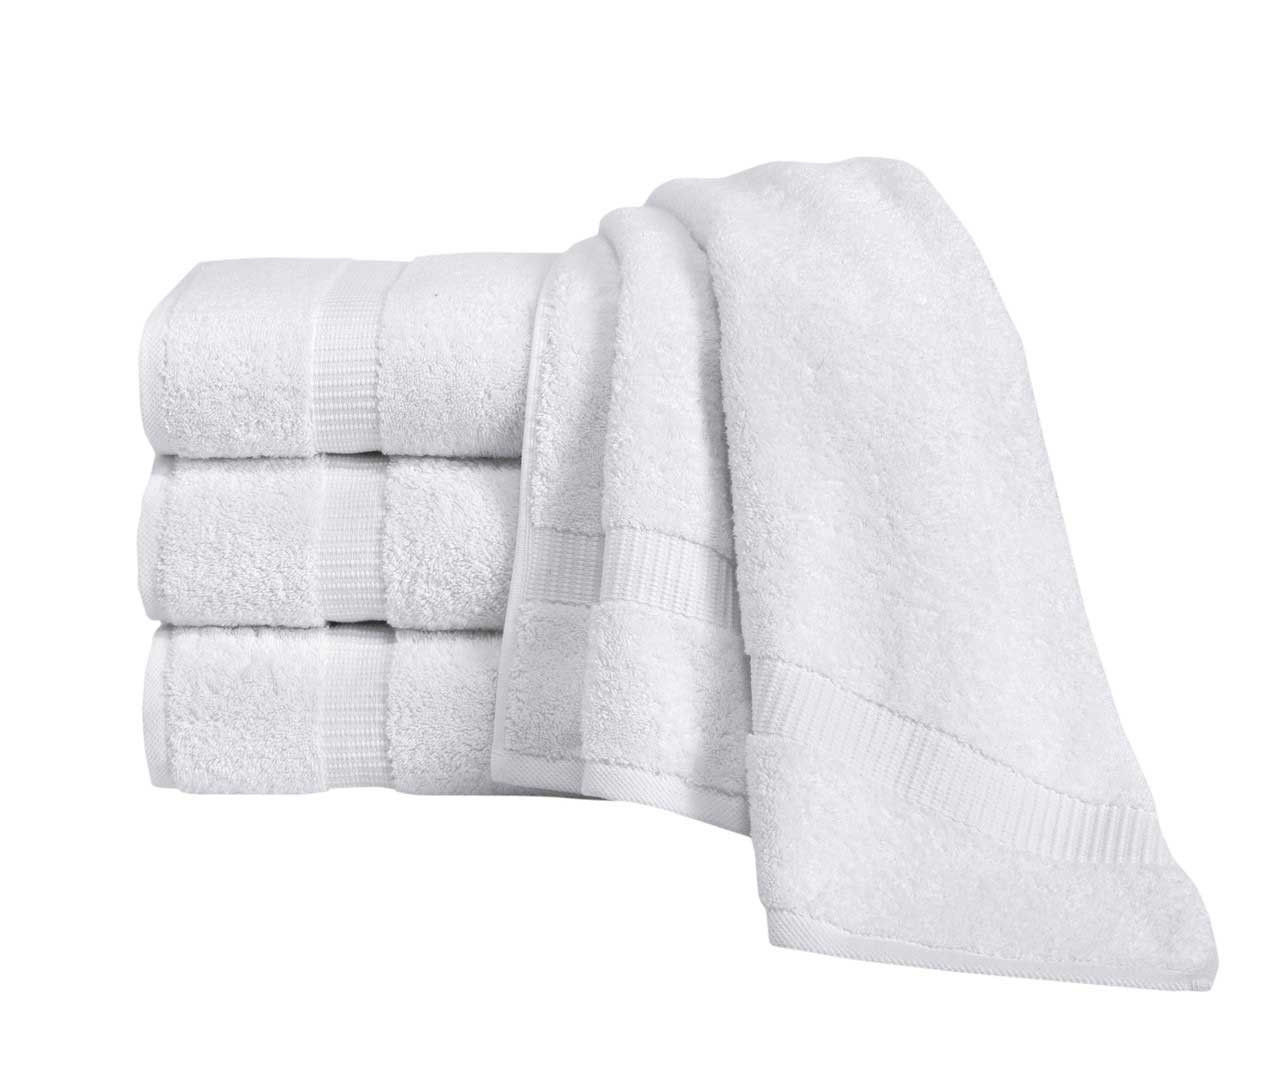 Why are the Royal Turkish towels from the Villa Collection so highly valued?